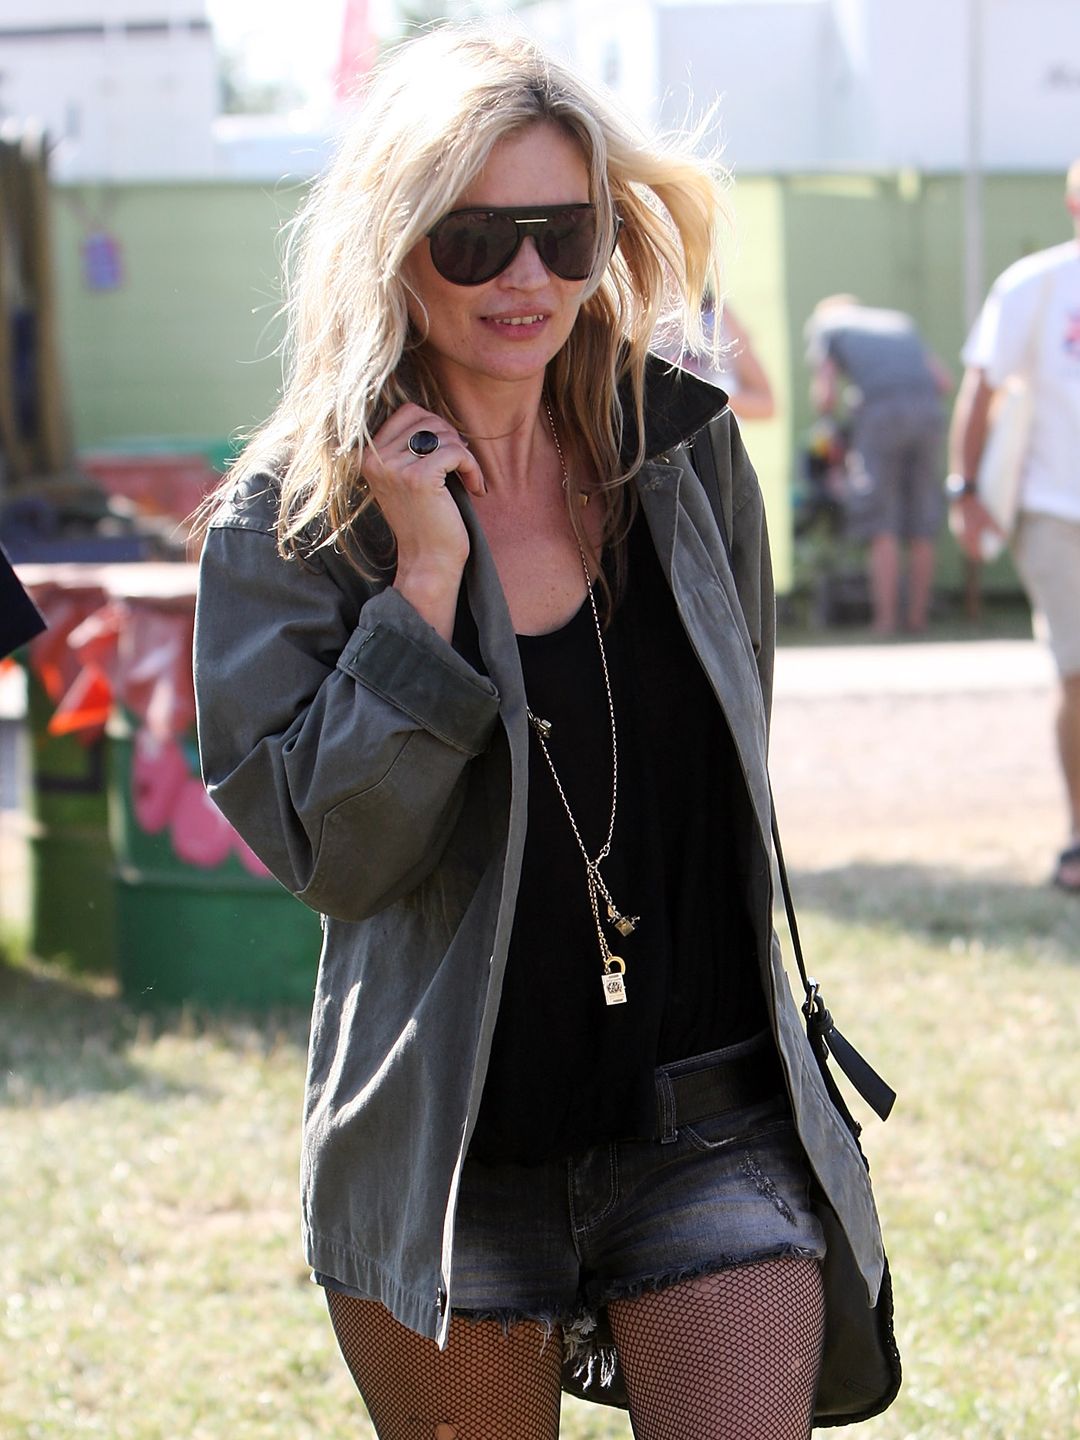 Lila Moss takes festival cues from mother Kate Moss in mini shorts at ...